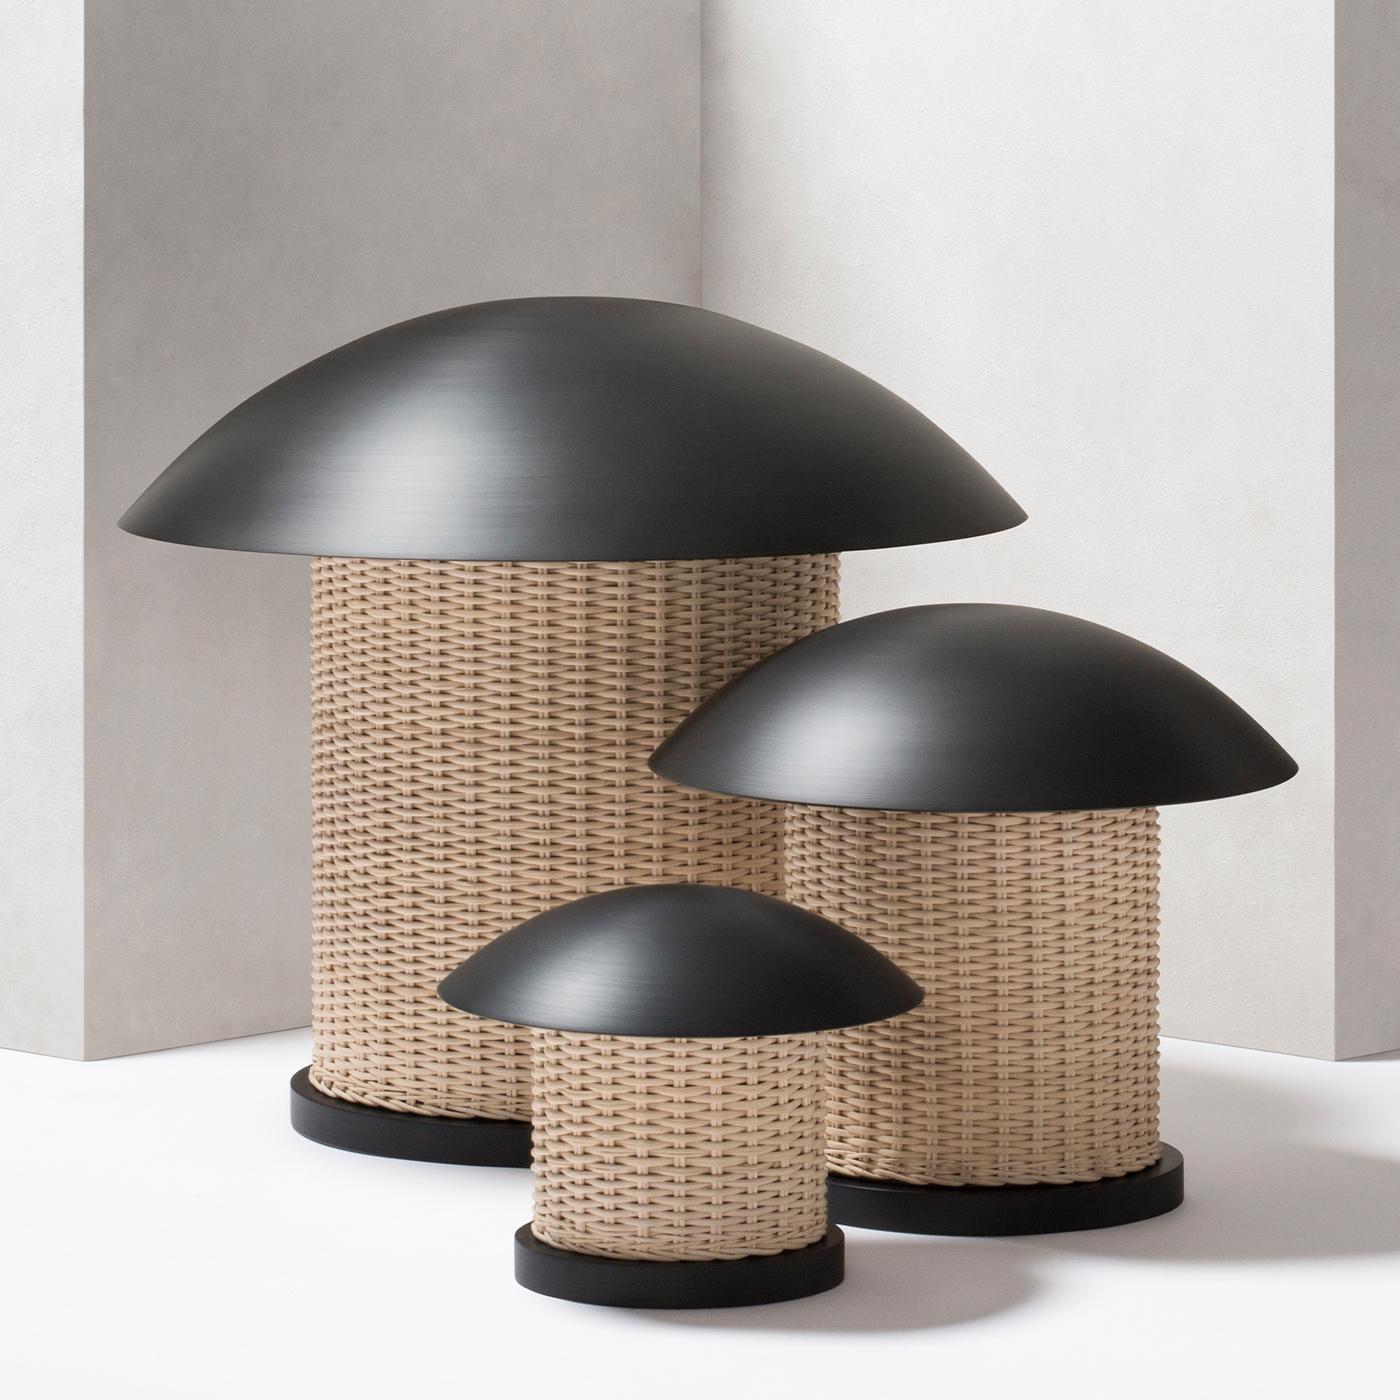 Boasting distinctive features that make this collection stand out, Duomo combines references to the lighting trends of the 1970s with clean, minimal lines and geometrical volumes, as well as unique materials, resulting in a sculptural luminous